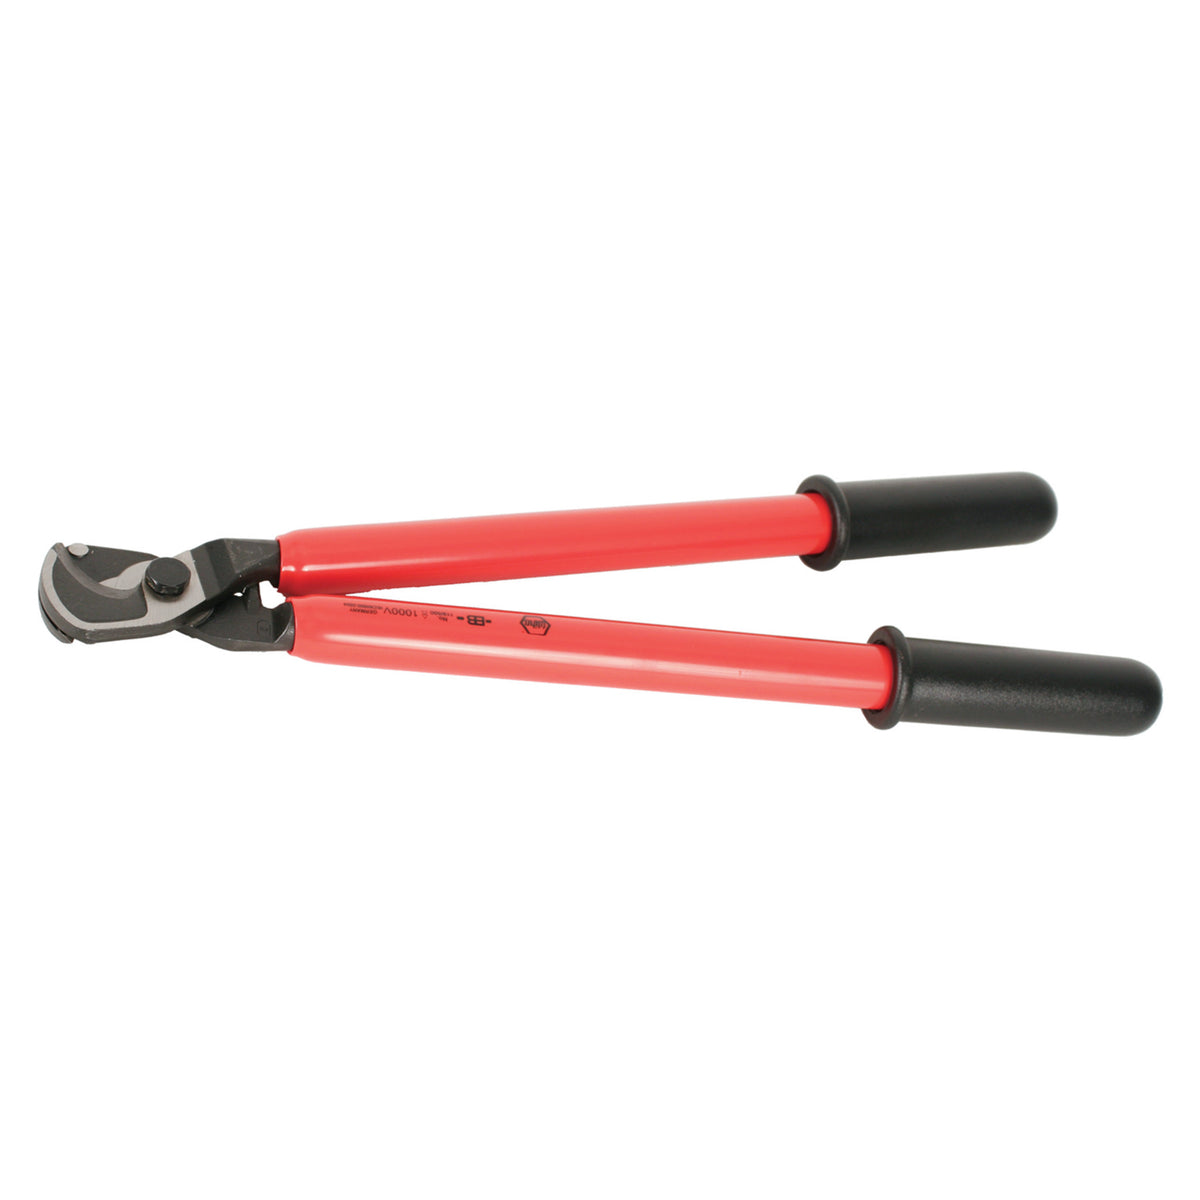 Wiha 11950 Insulated Cable Cutter